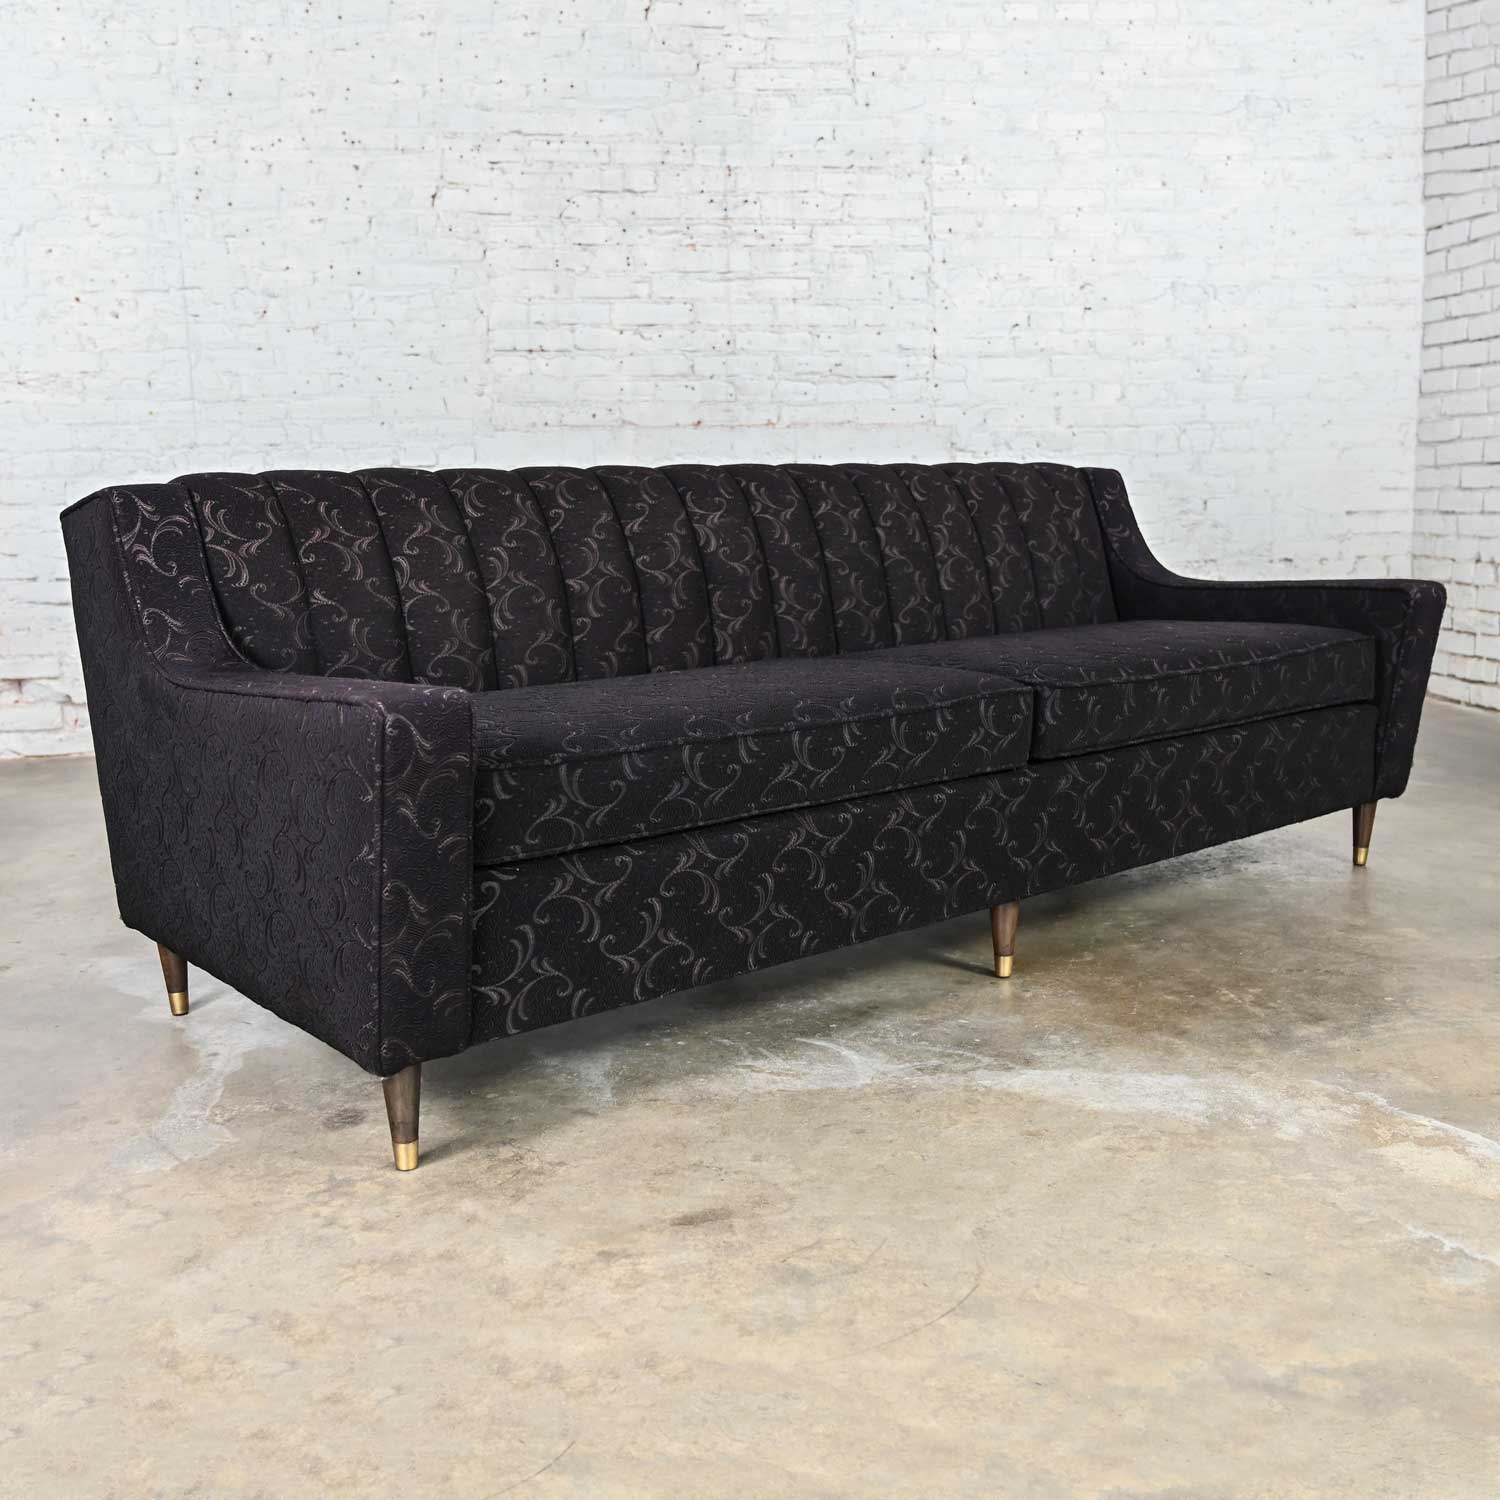 Vintage Mid-Century Modern Modified Lawson Style Sofa Black Frieze Fabric & Channeled Back